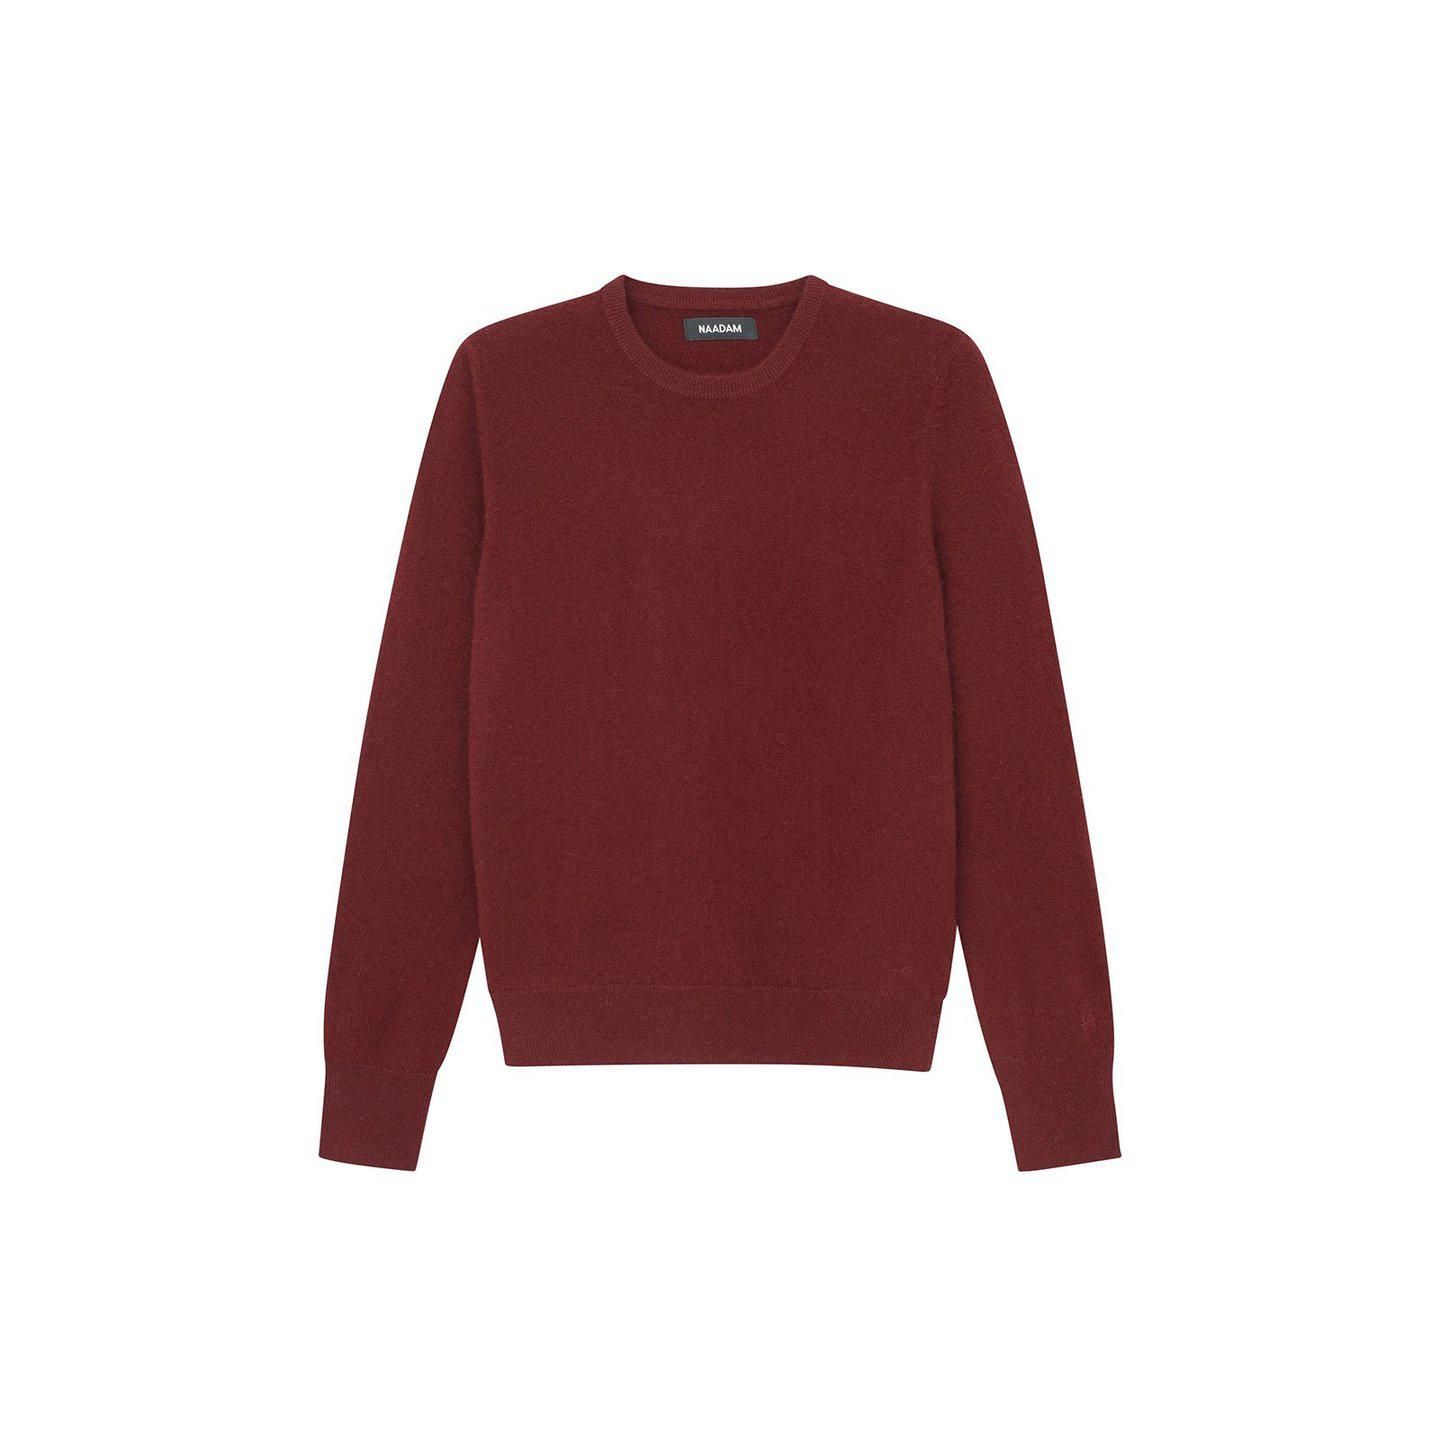 The Essential $75 Cashmere Sweater